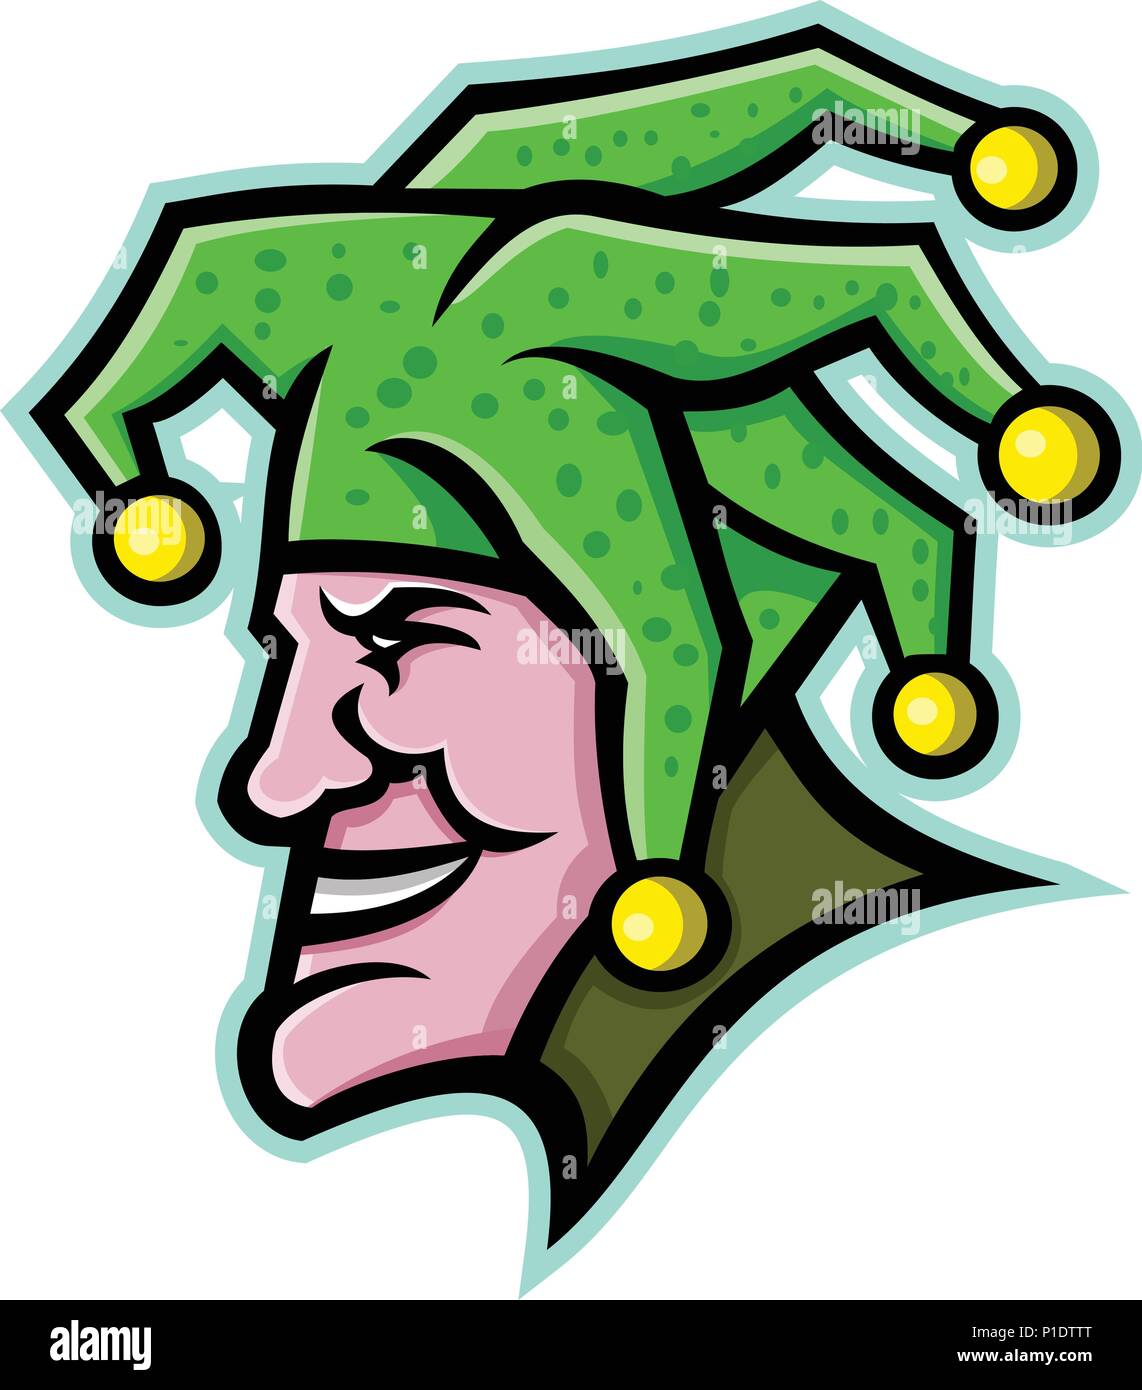 Mascot icon illustration of head of a harlequin, jester, minstrel, joker, medieval singer or musician, entertainer viewed from side on isolated backgr Stock Vector